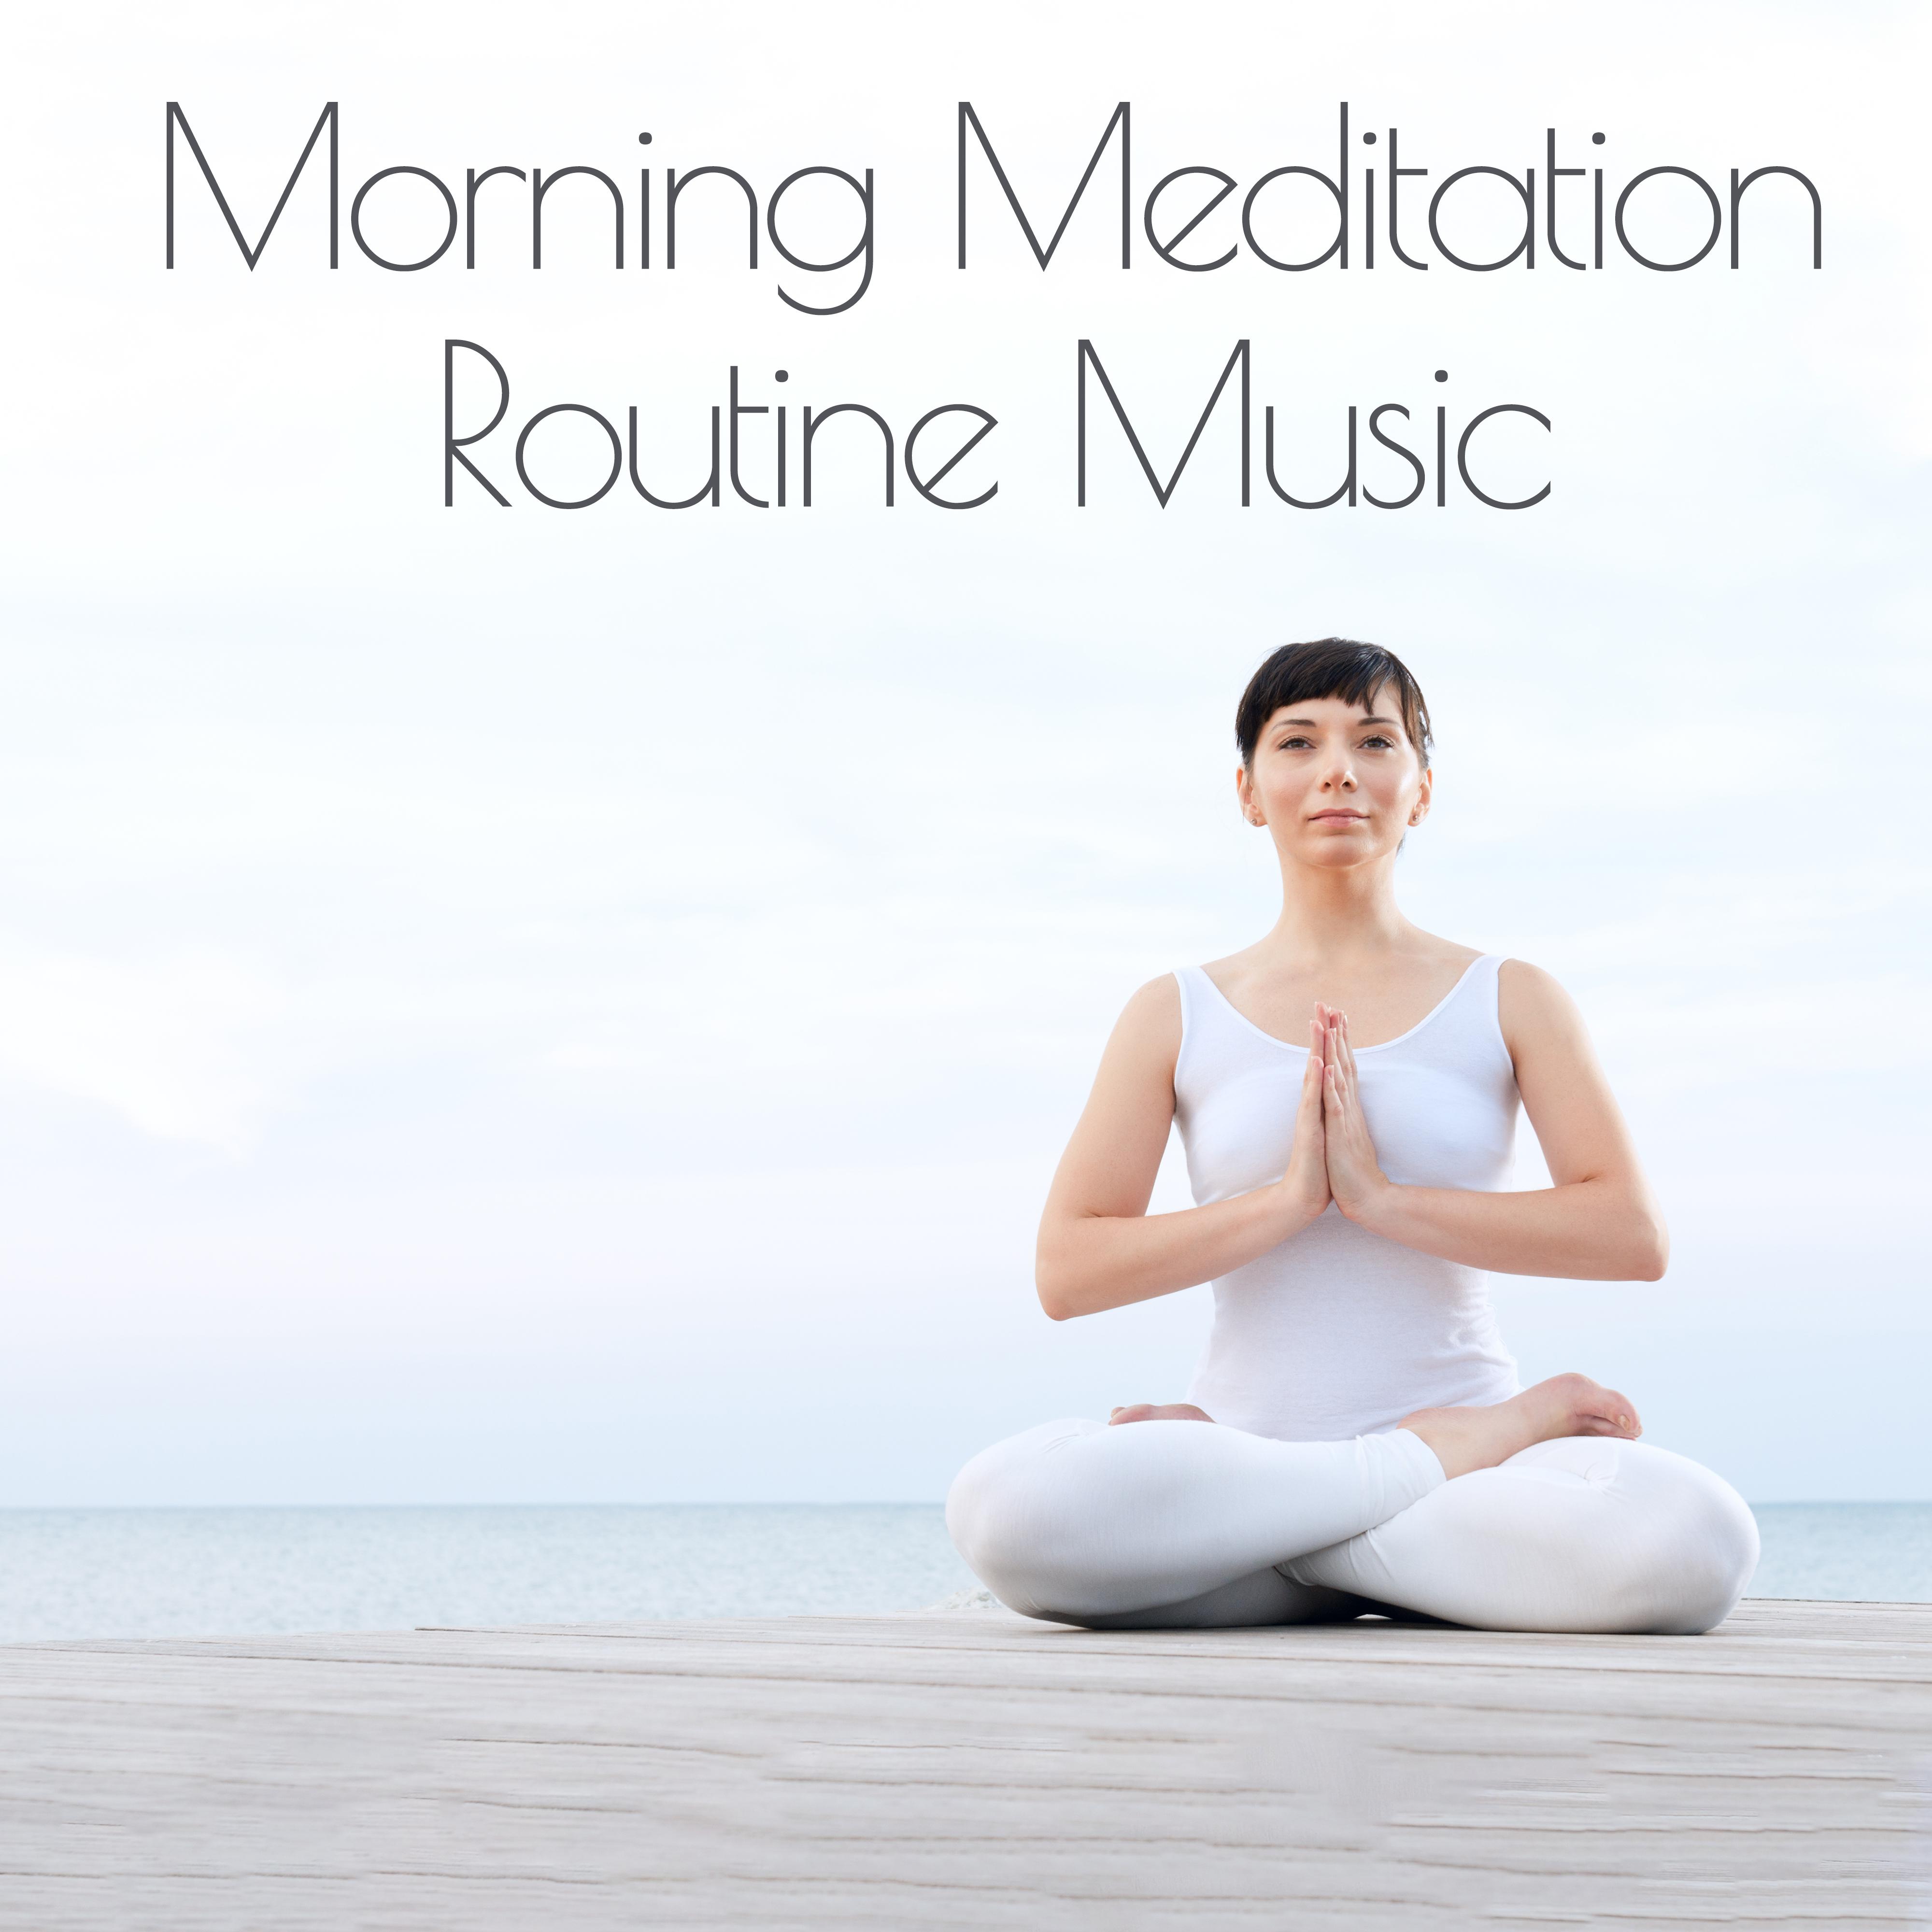 Morning Meditation Routine Music: 2019 New Age Soft & Deep Melodies for Perfect Start a Day with Yoga Training